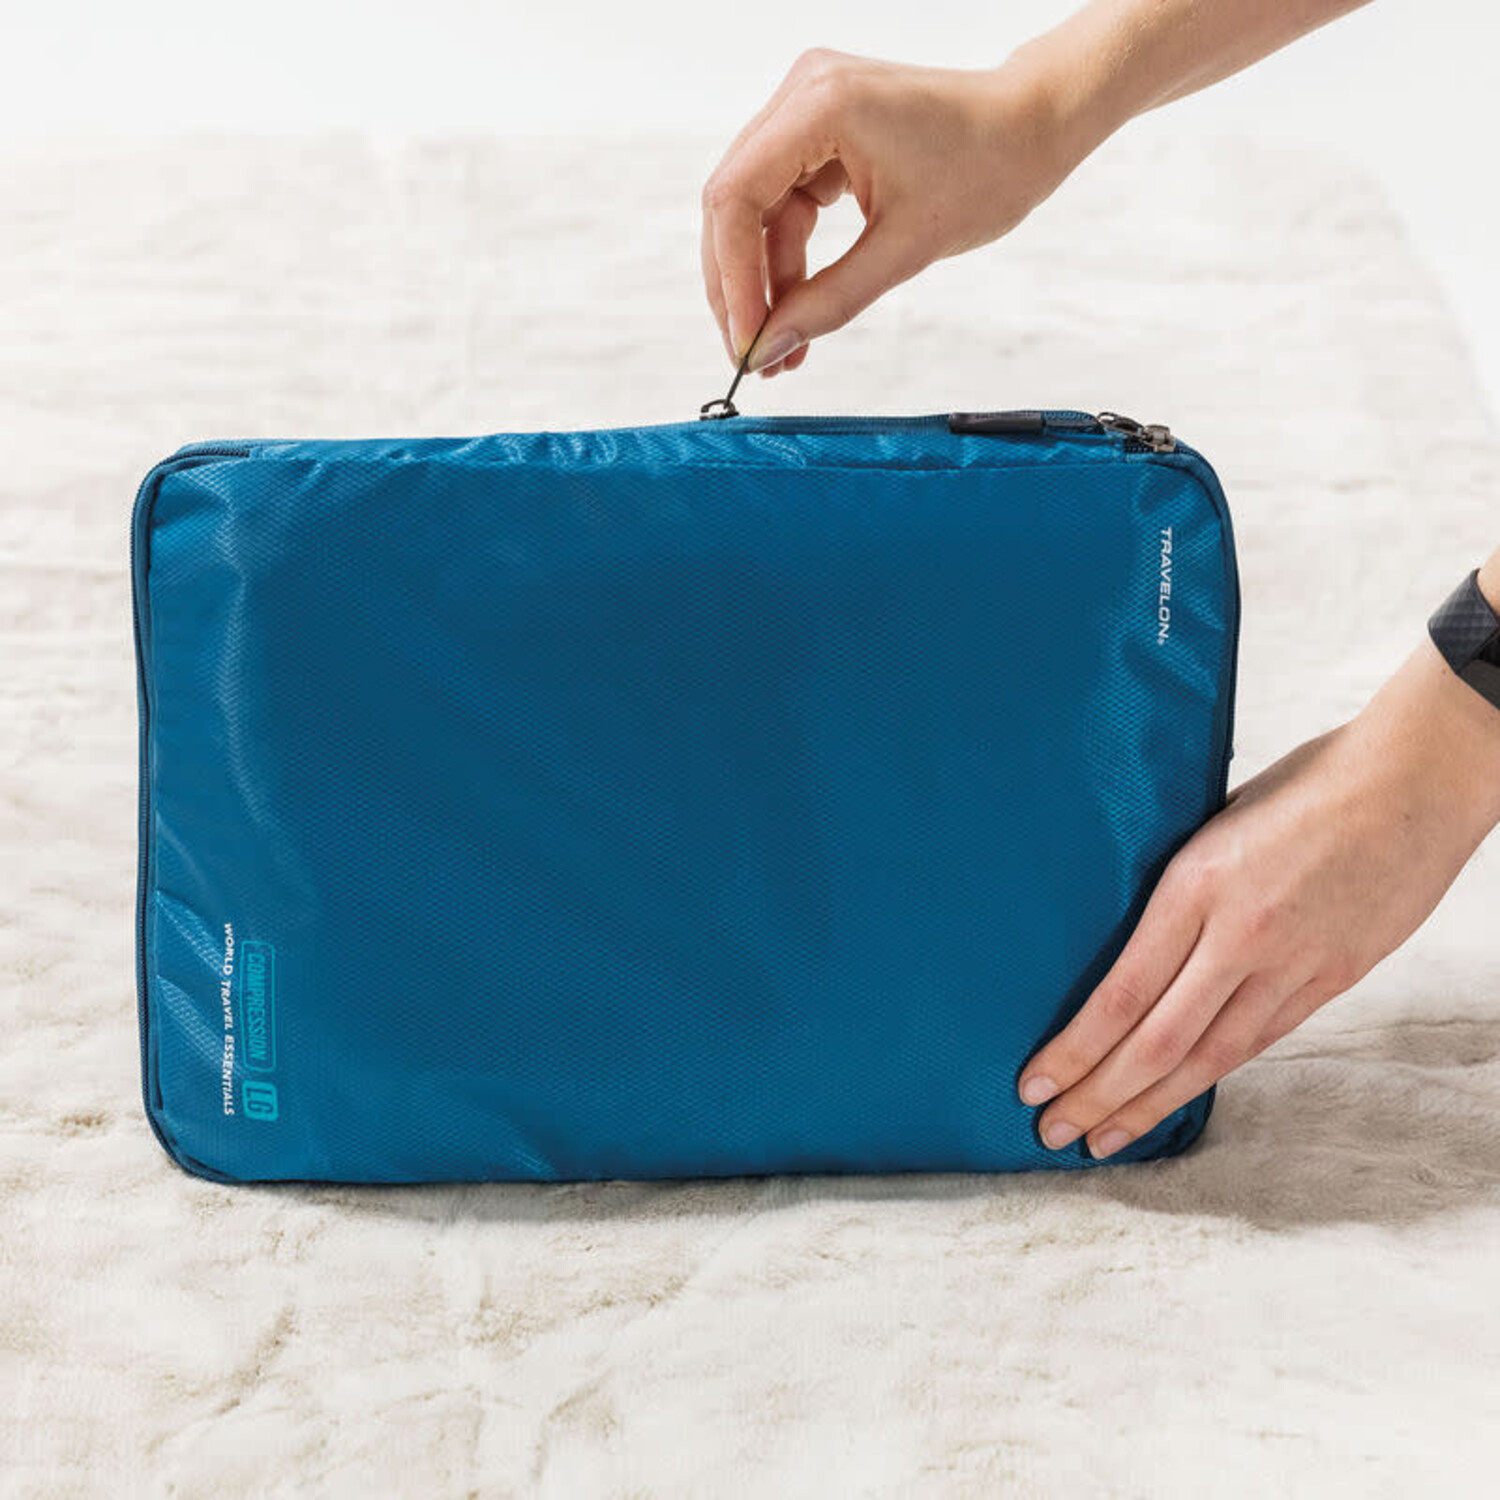 Travelon Set of 2 Compression Packing Cubes- Teal - Just Bags Luggage Center